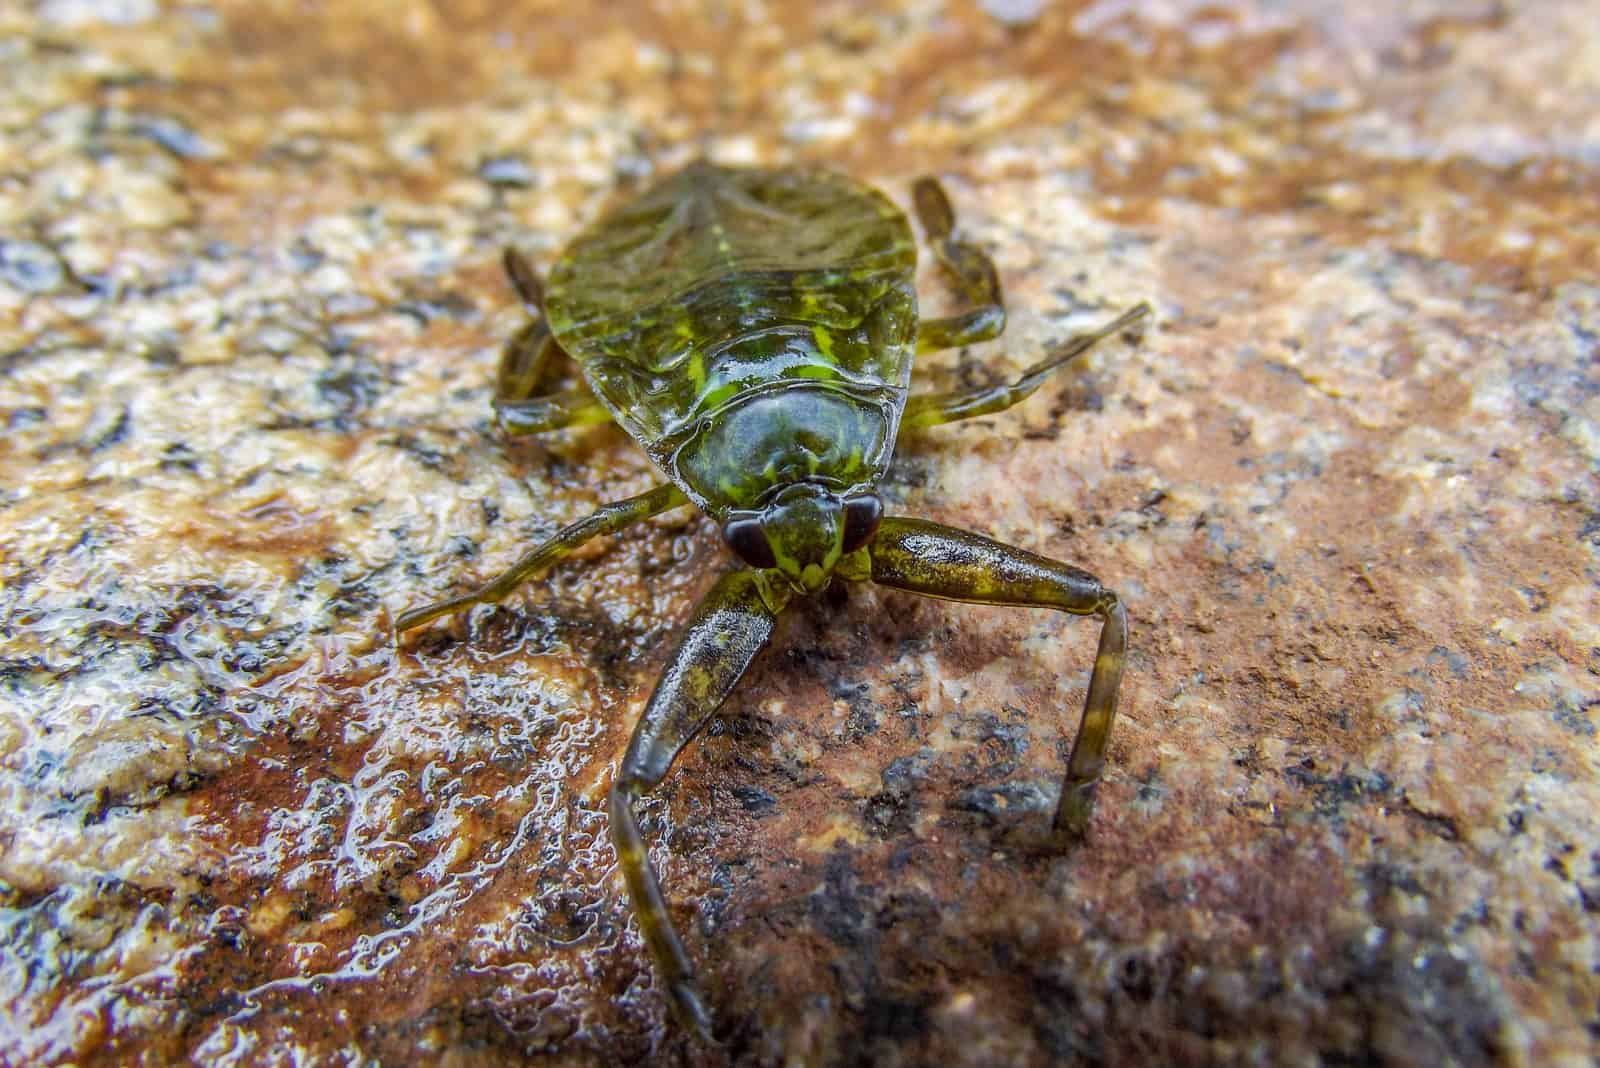 Giant Water Bug on a Rock